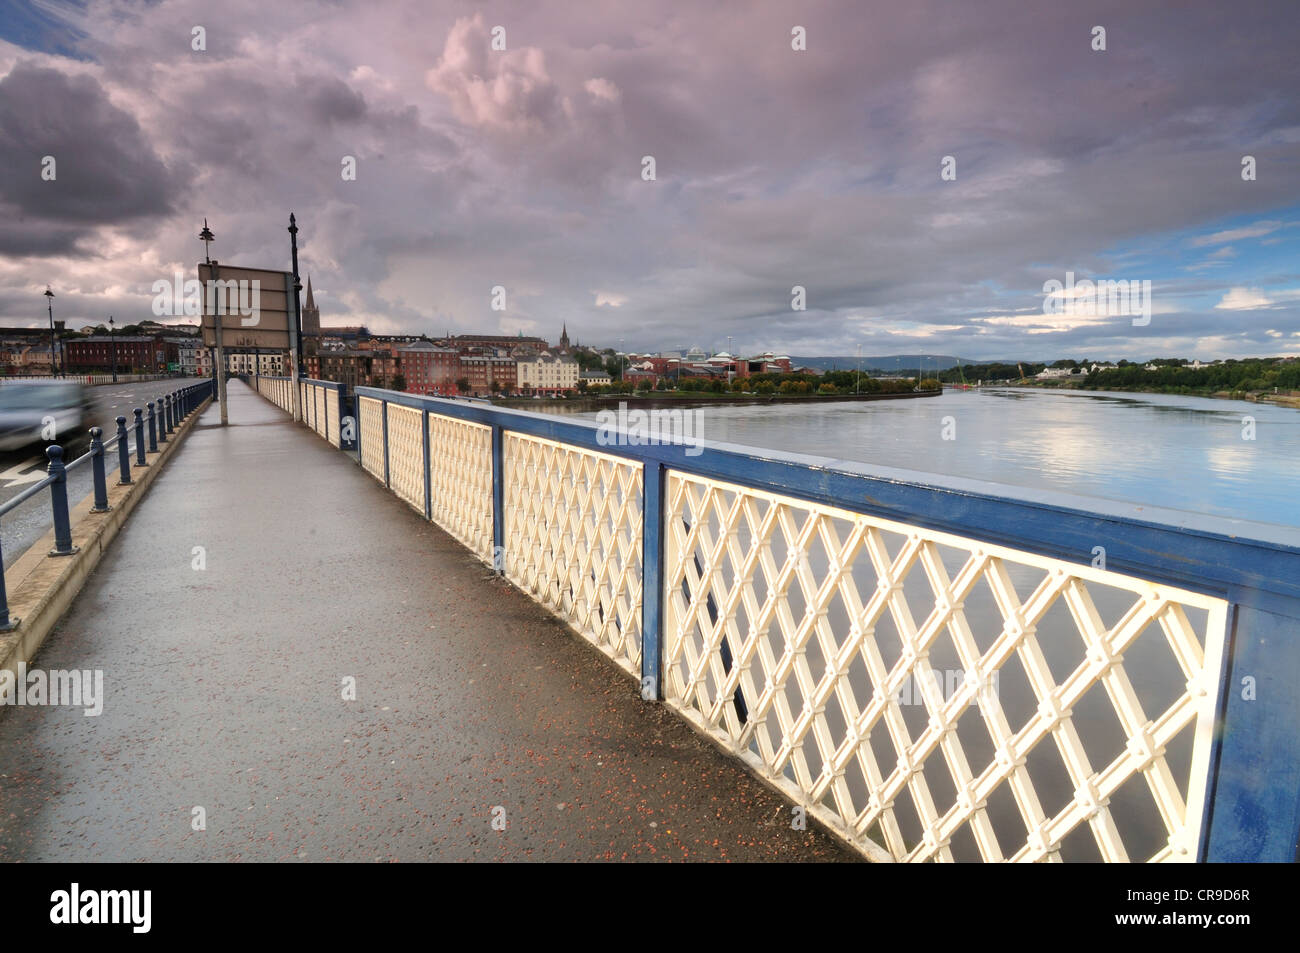 Bridge on the Foyle River, Derry, Derry County, North Ireland, Europe Stock Photo